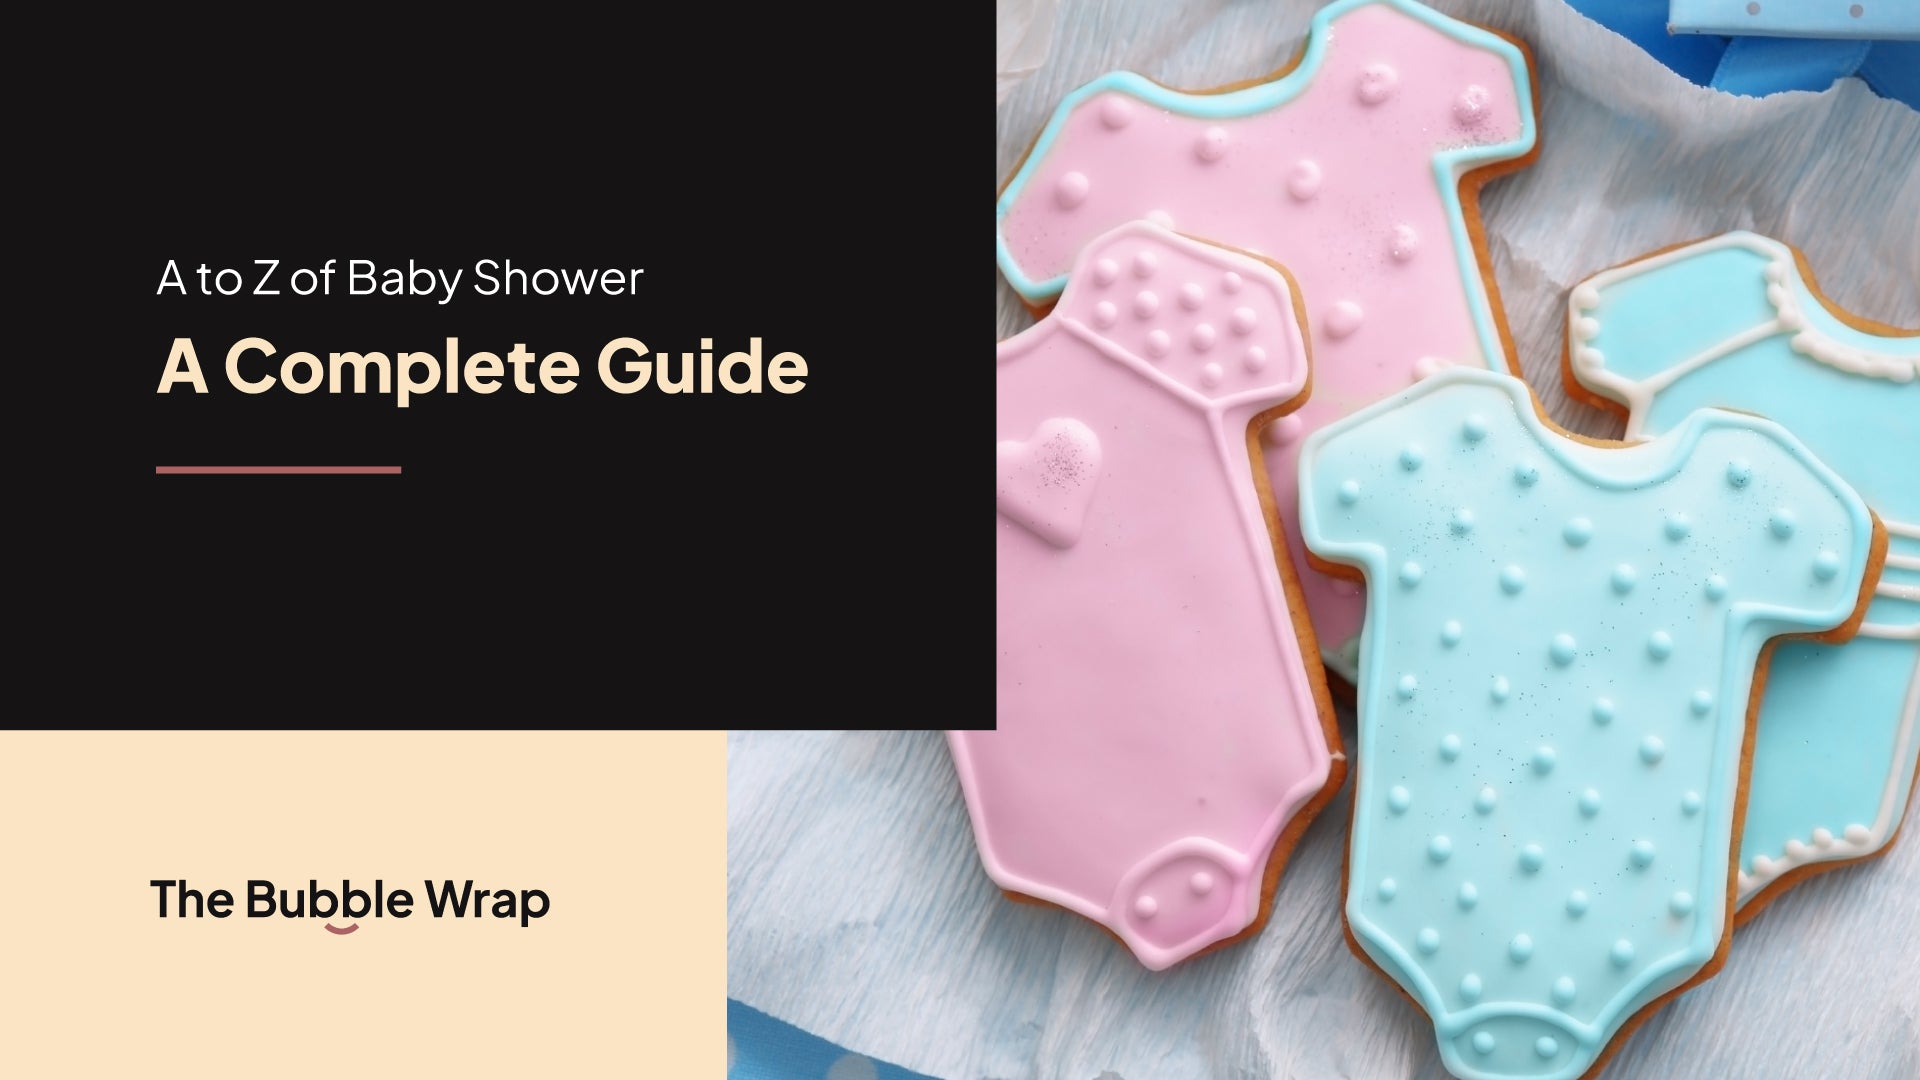 A to Z of Baby Shower: A Complete Guide